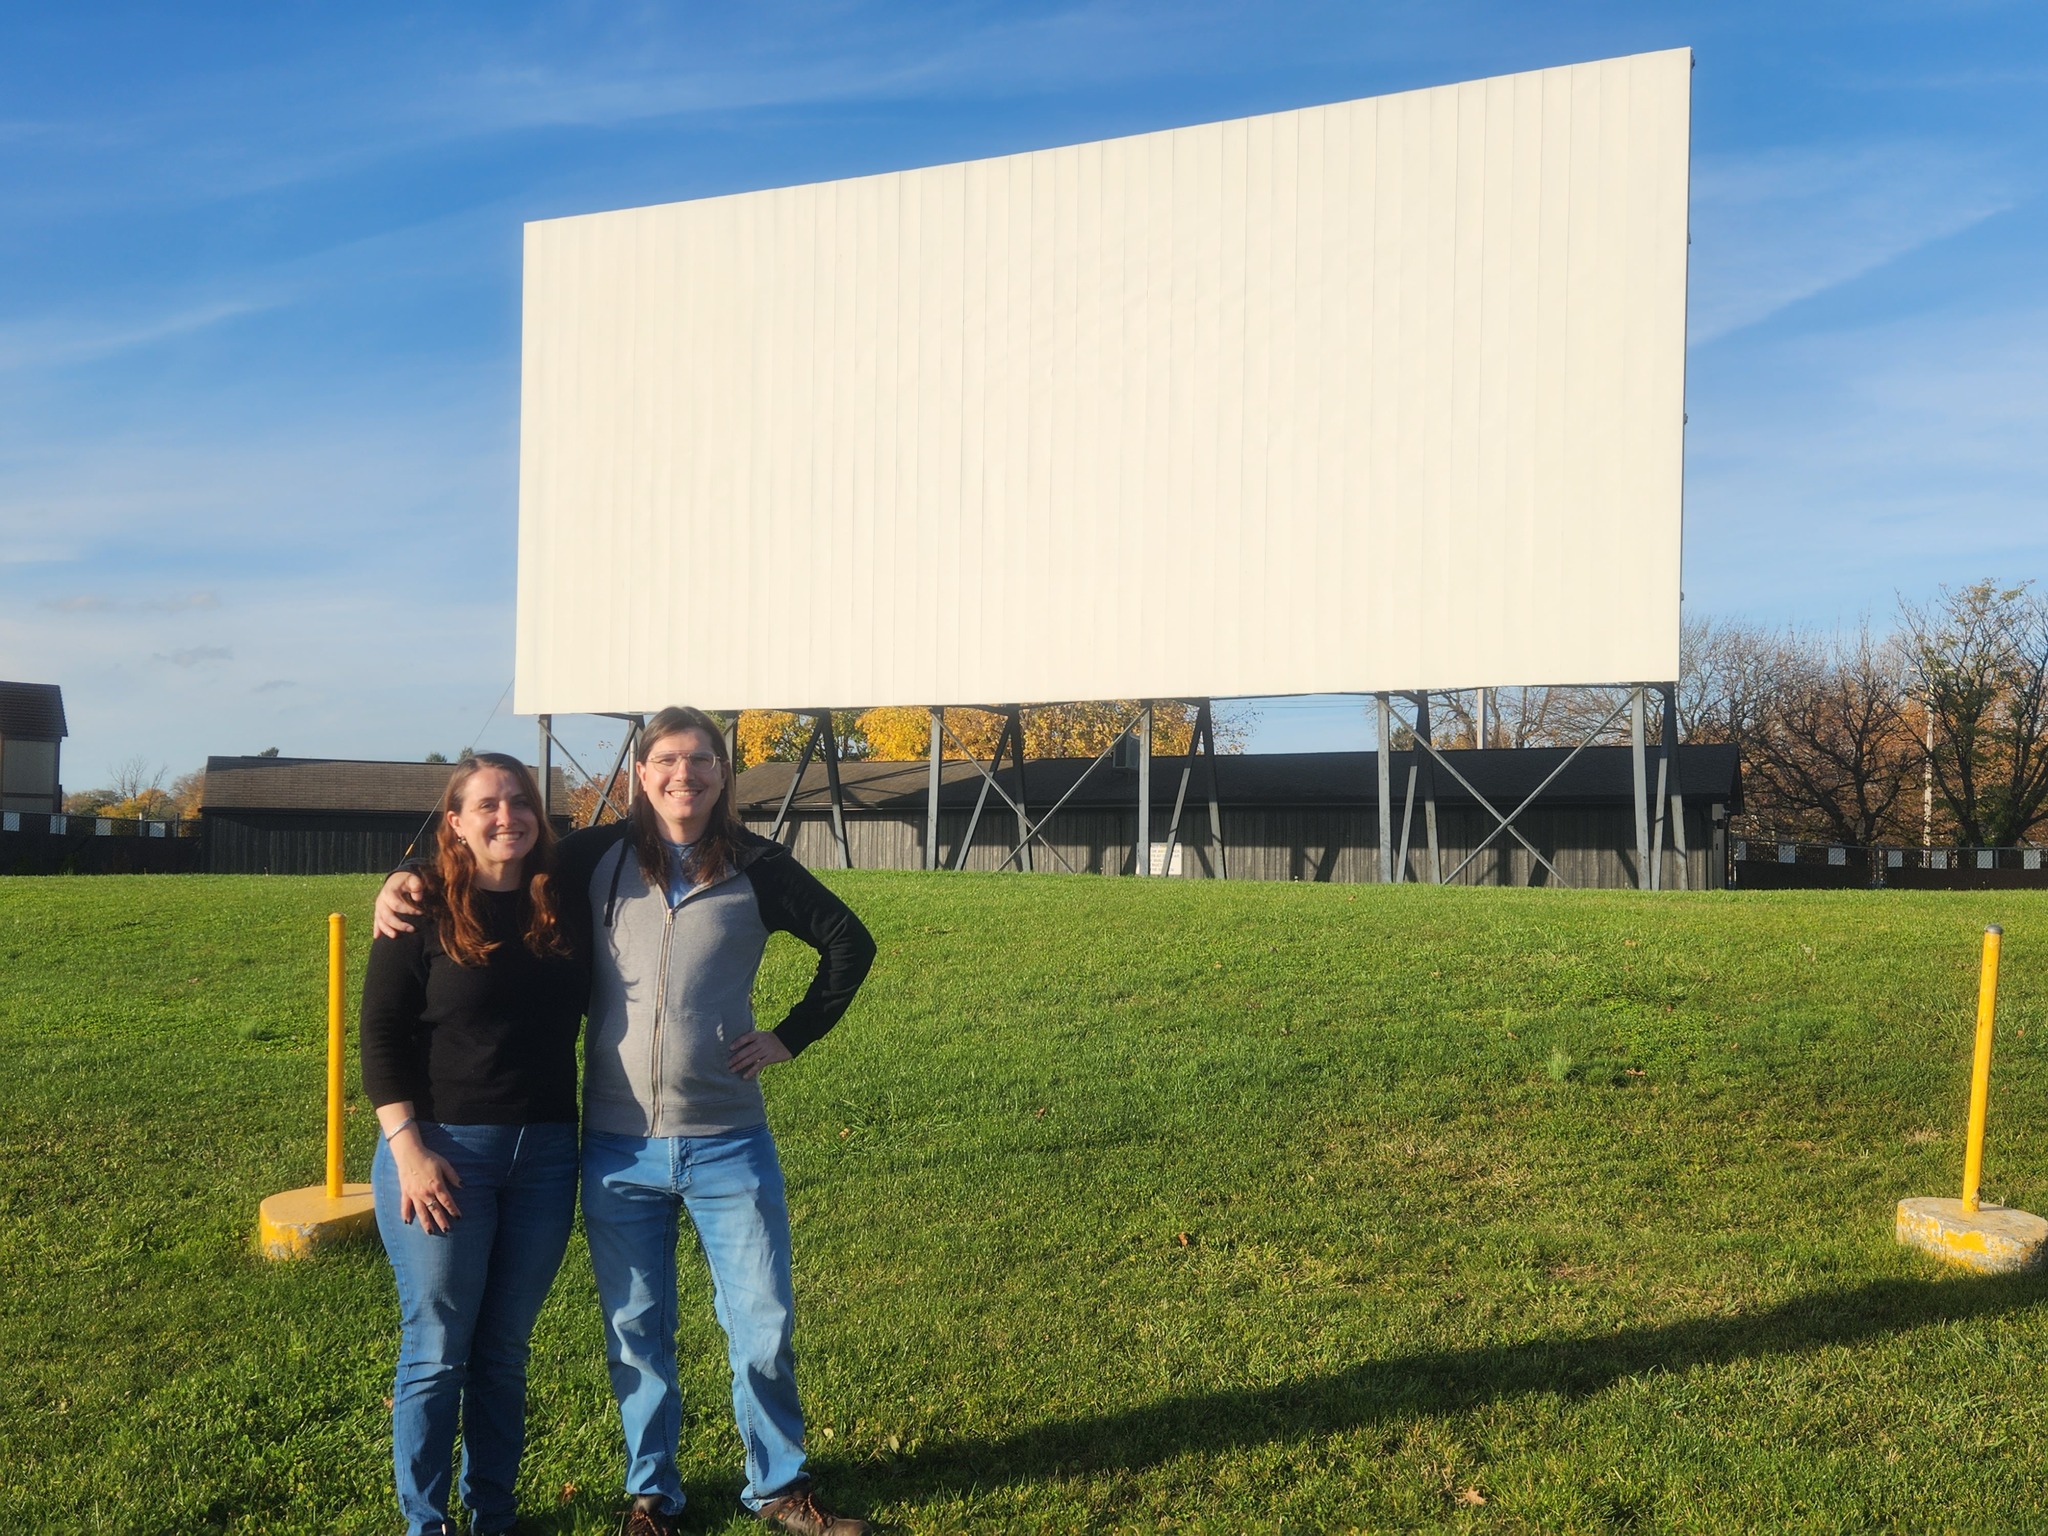 Shankweiler’s Next Generation: Meet the New Owners of America’s Oldest Drive-in